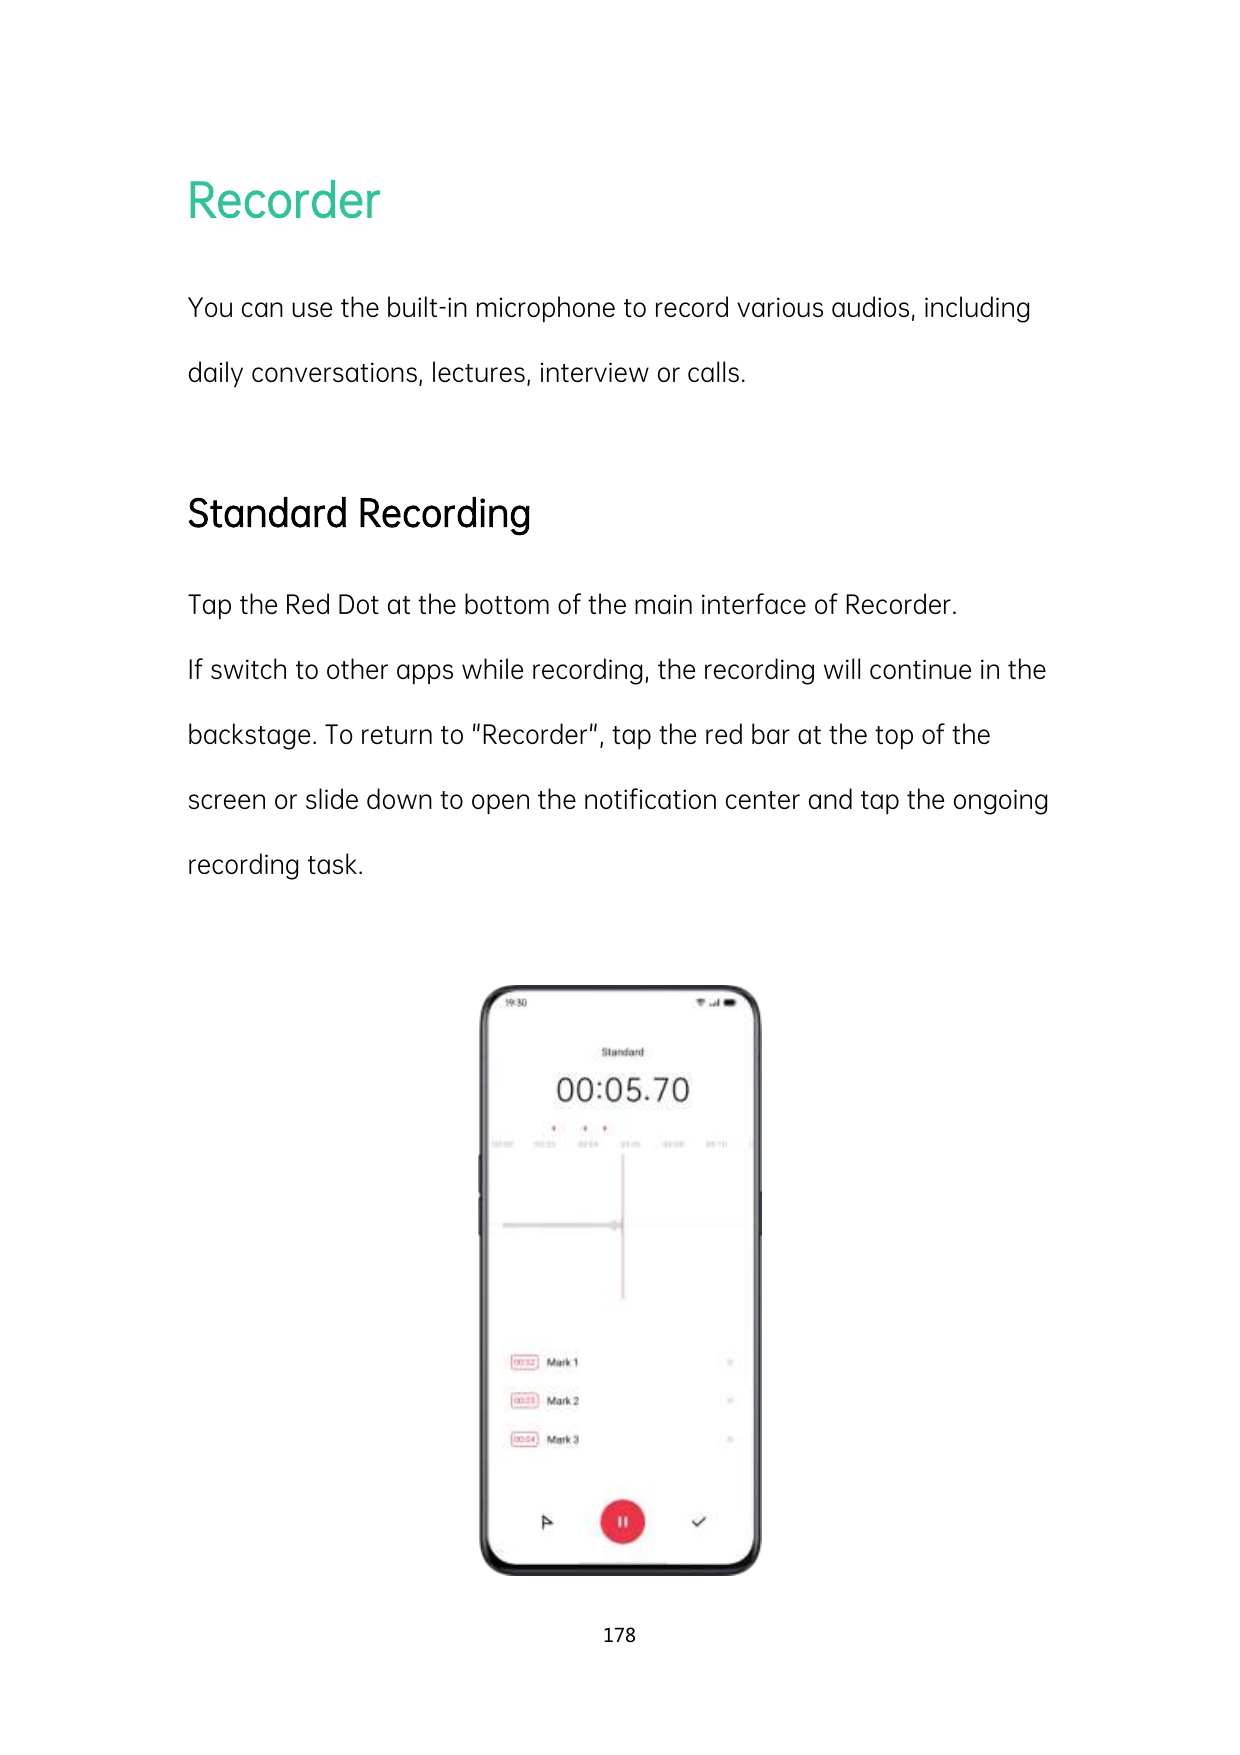 RecorderYou can use the built-in microphone to record various audios, includingdaily conversations, lectures, interview or calls